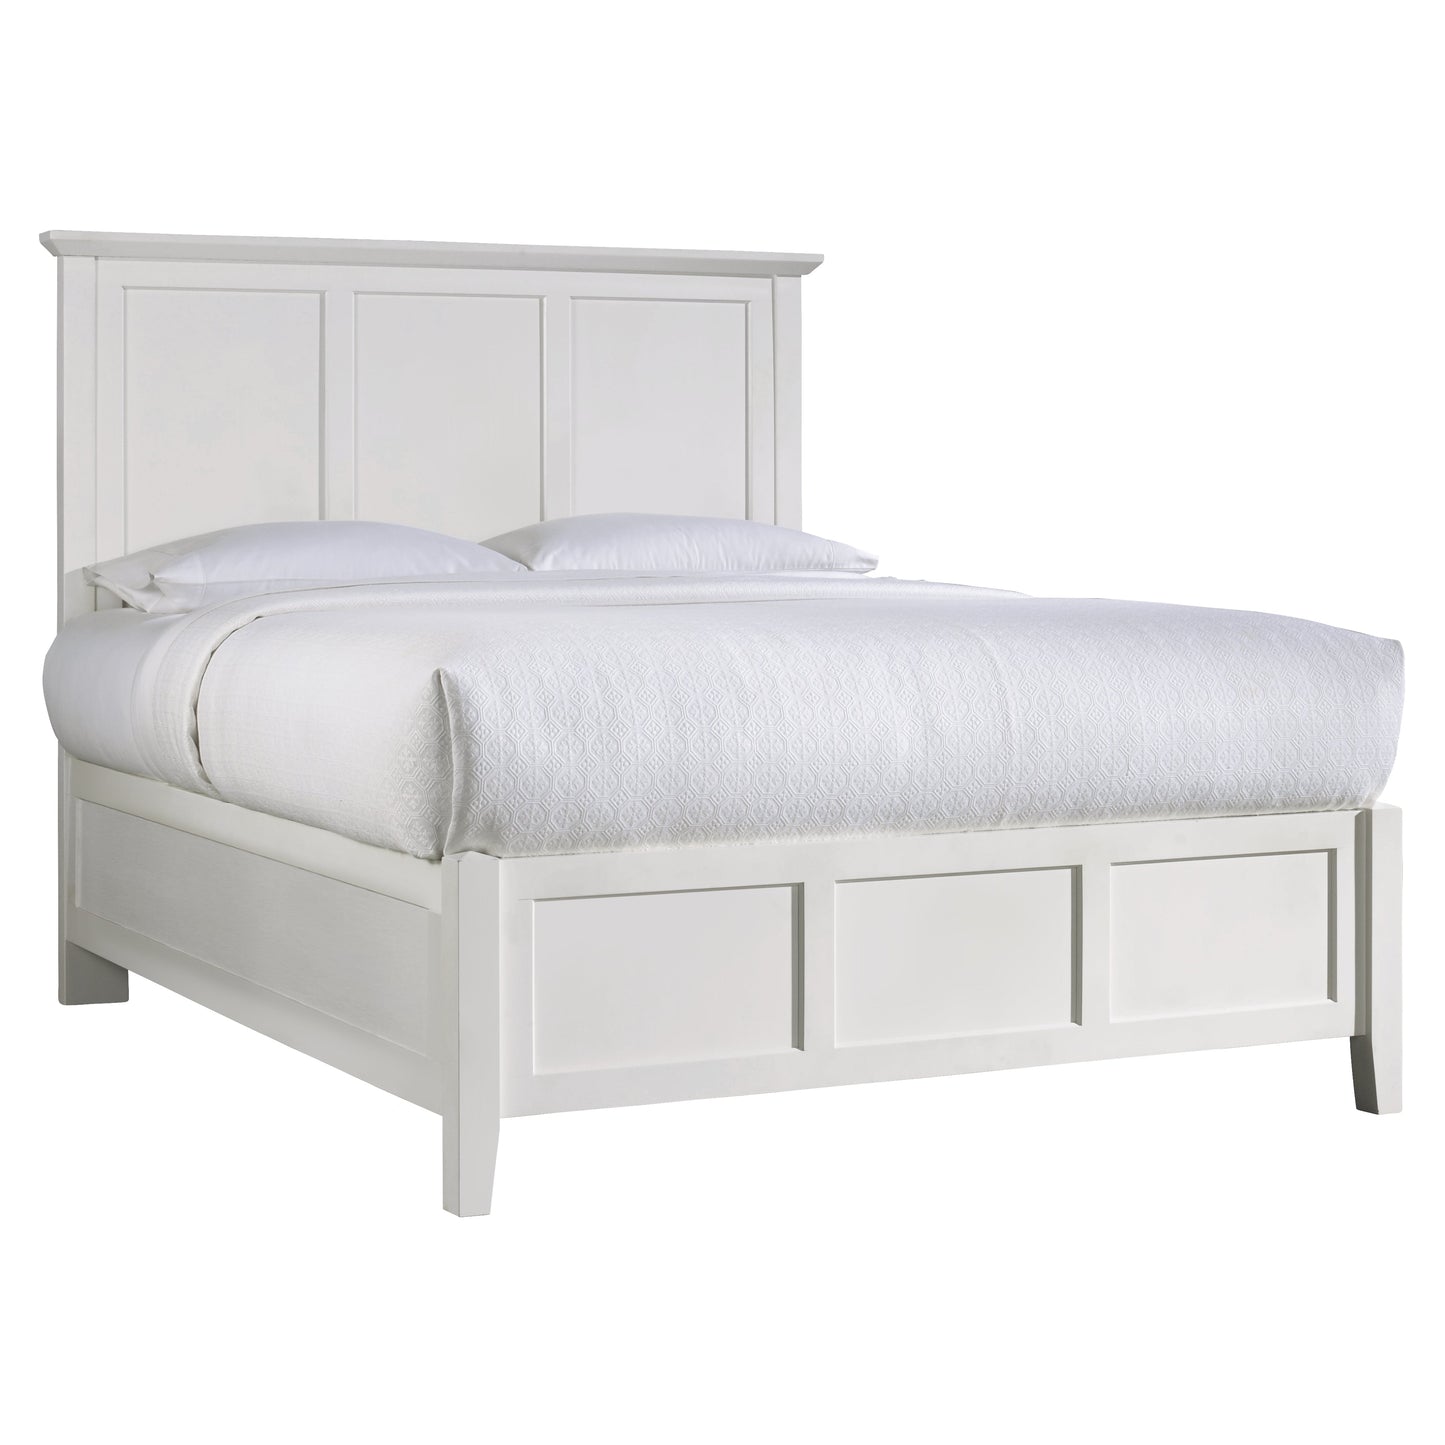 Modus Paragon 6PC Queen Bed Set w Chest in White